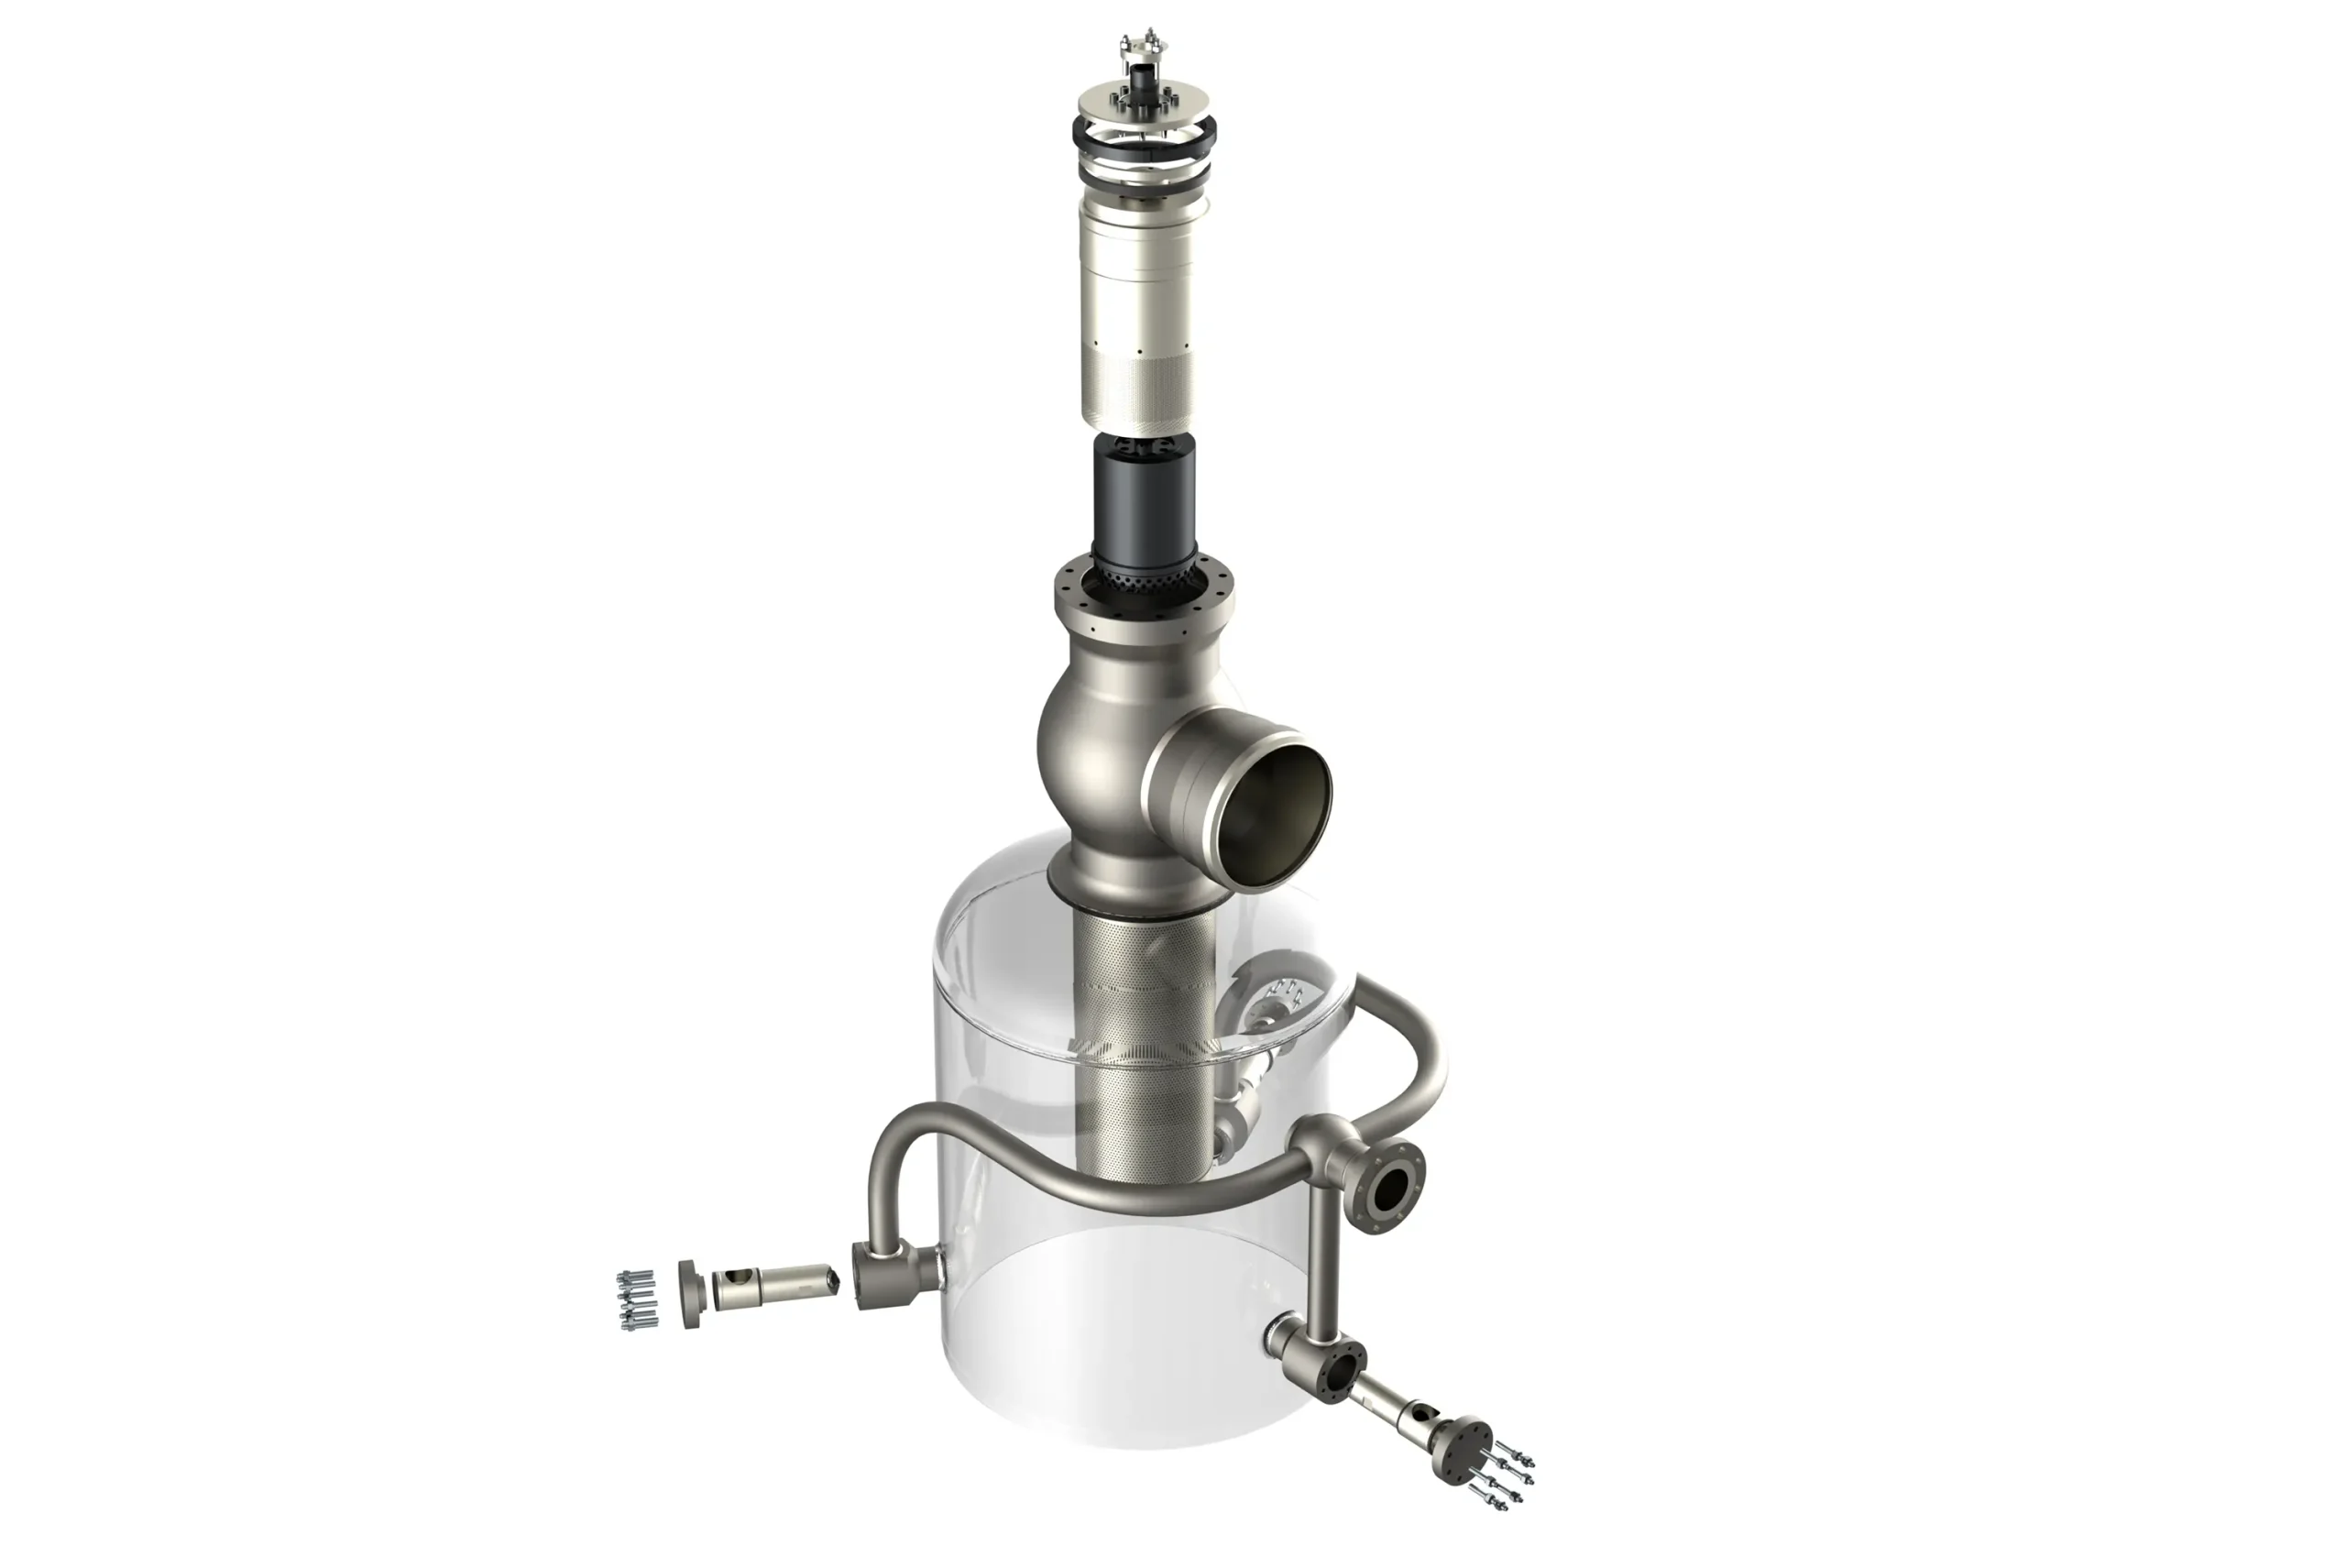 VLB3 steam conditioning valve: Regulates steam flow, temp, and pressure in industrial apps. Durable stainless steel construction for high temp/pressure.